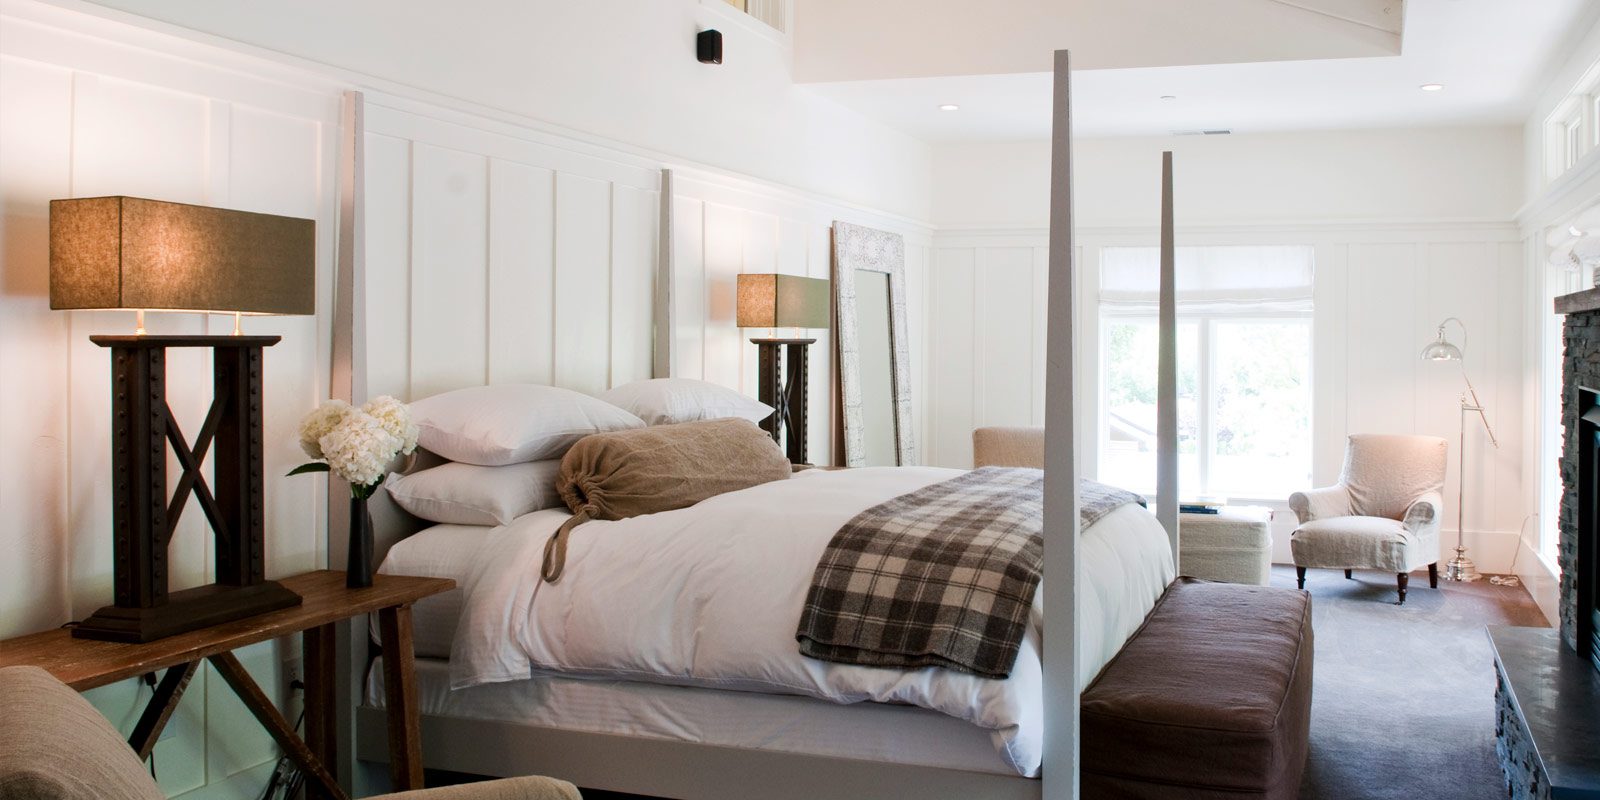 Interior view of Barn Junior Suite. White walls, stone fireplace with mounted TV above, large bed with white bedding with gray bedposts, high ceilings with ceiling fan.